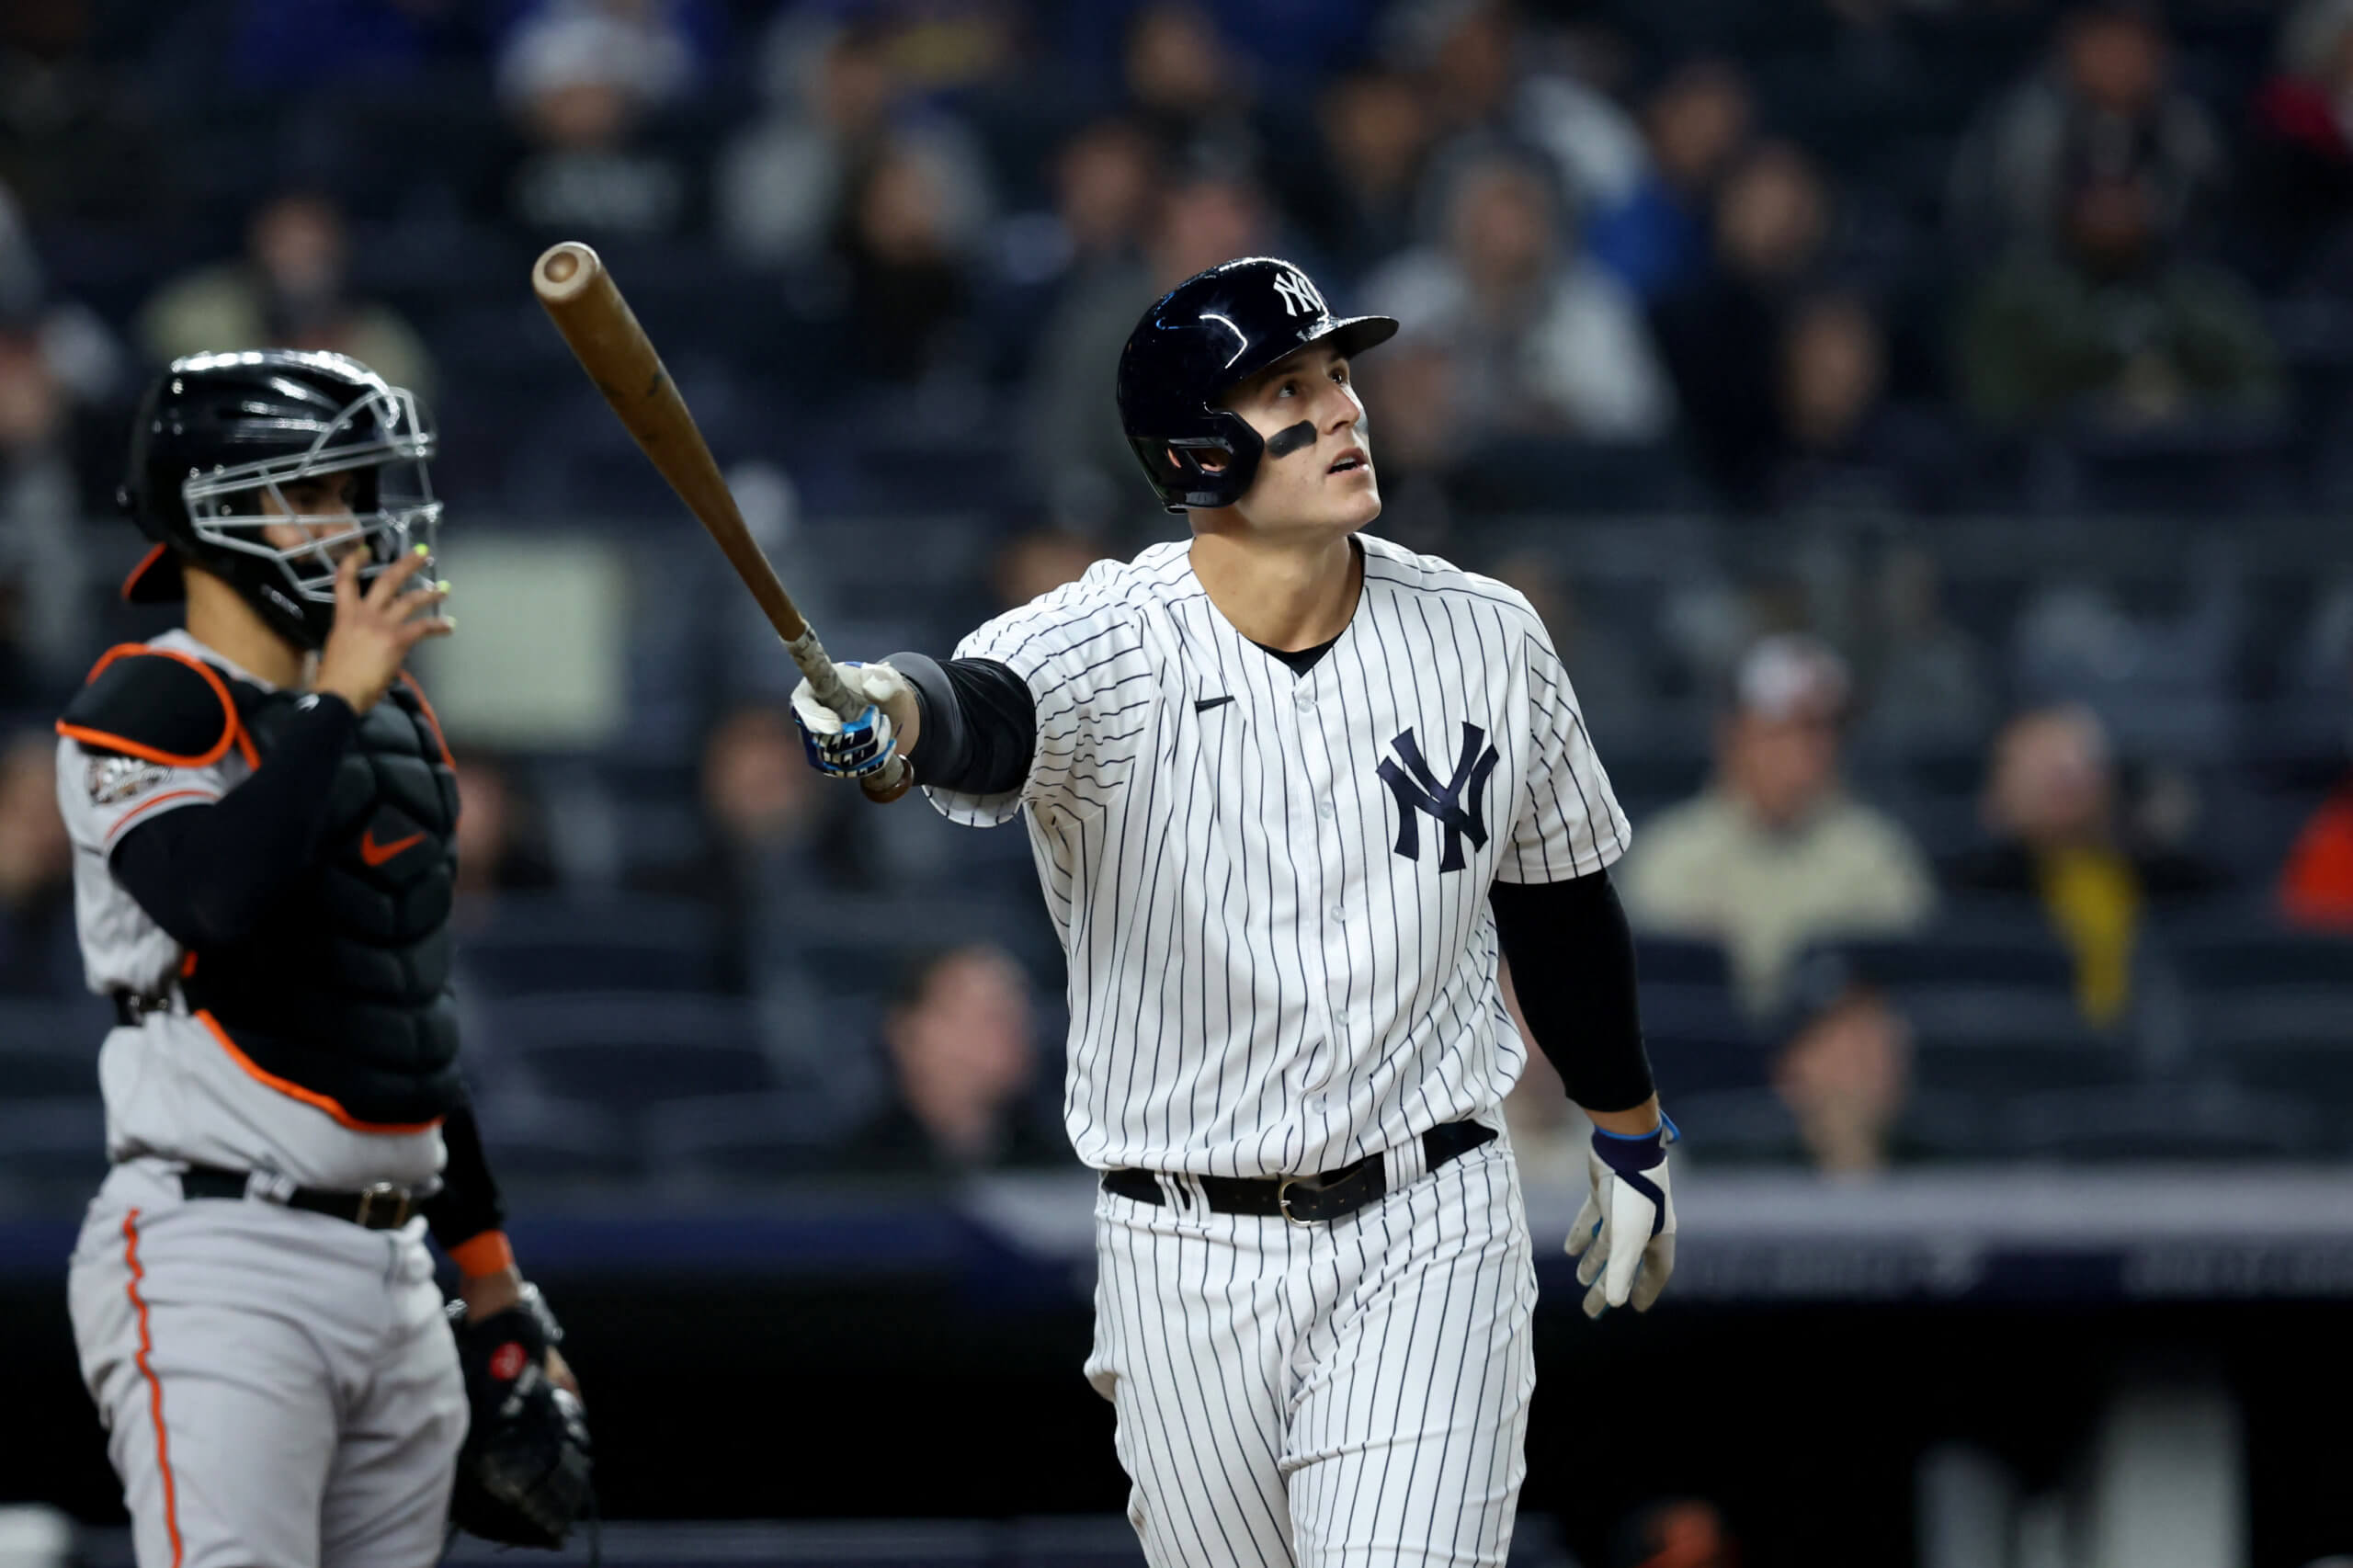 Photos: Anthony Rizzo homers for second straight game with Yankees